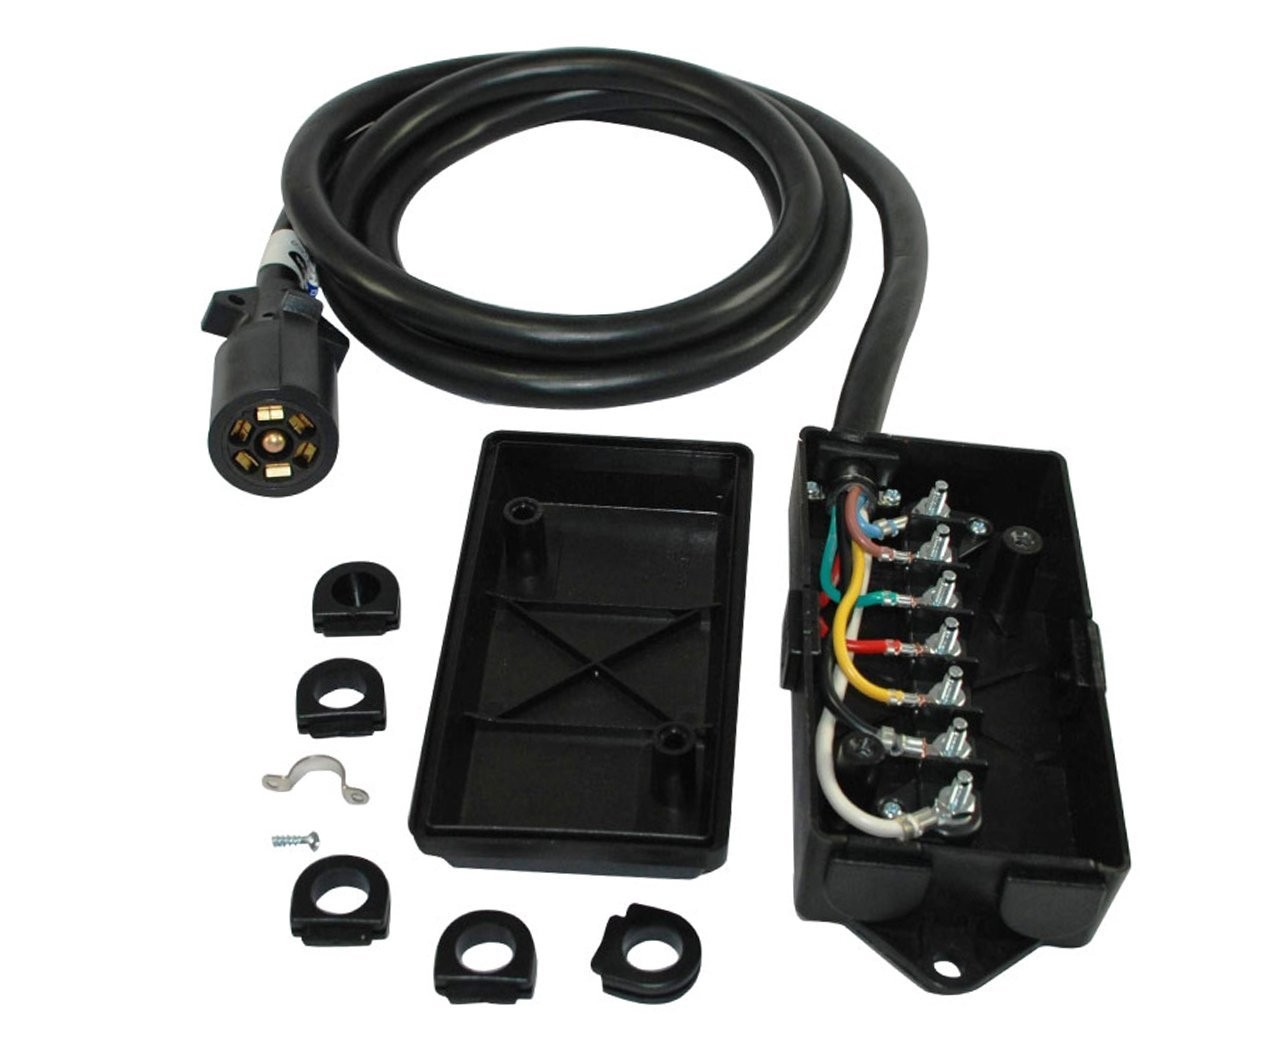 Amazon Conntek 7 Way Trailer Cord and Junction Box Sports & Outdoors